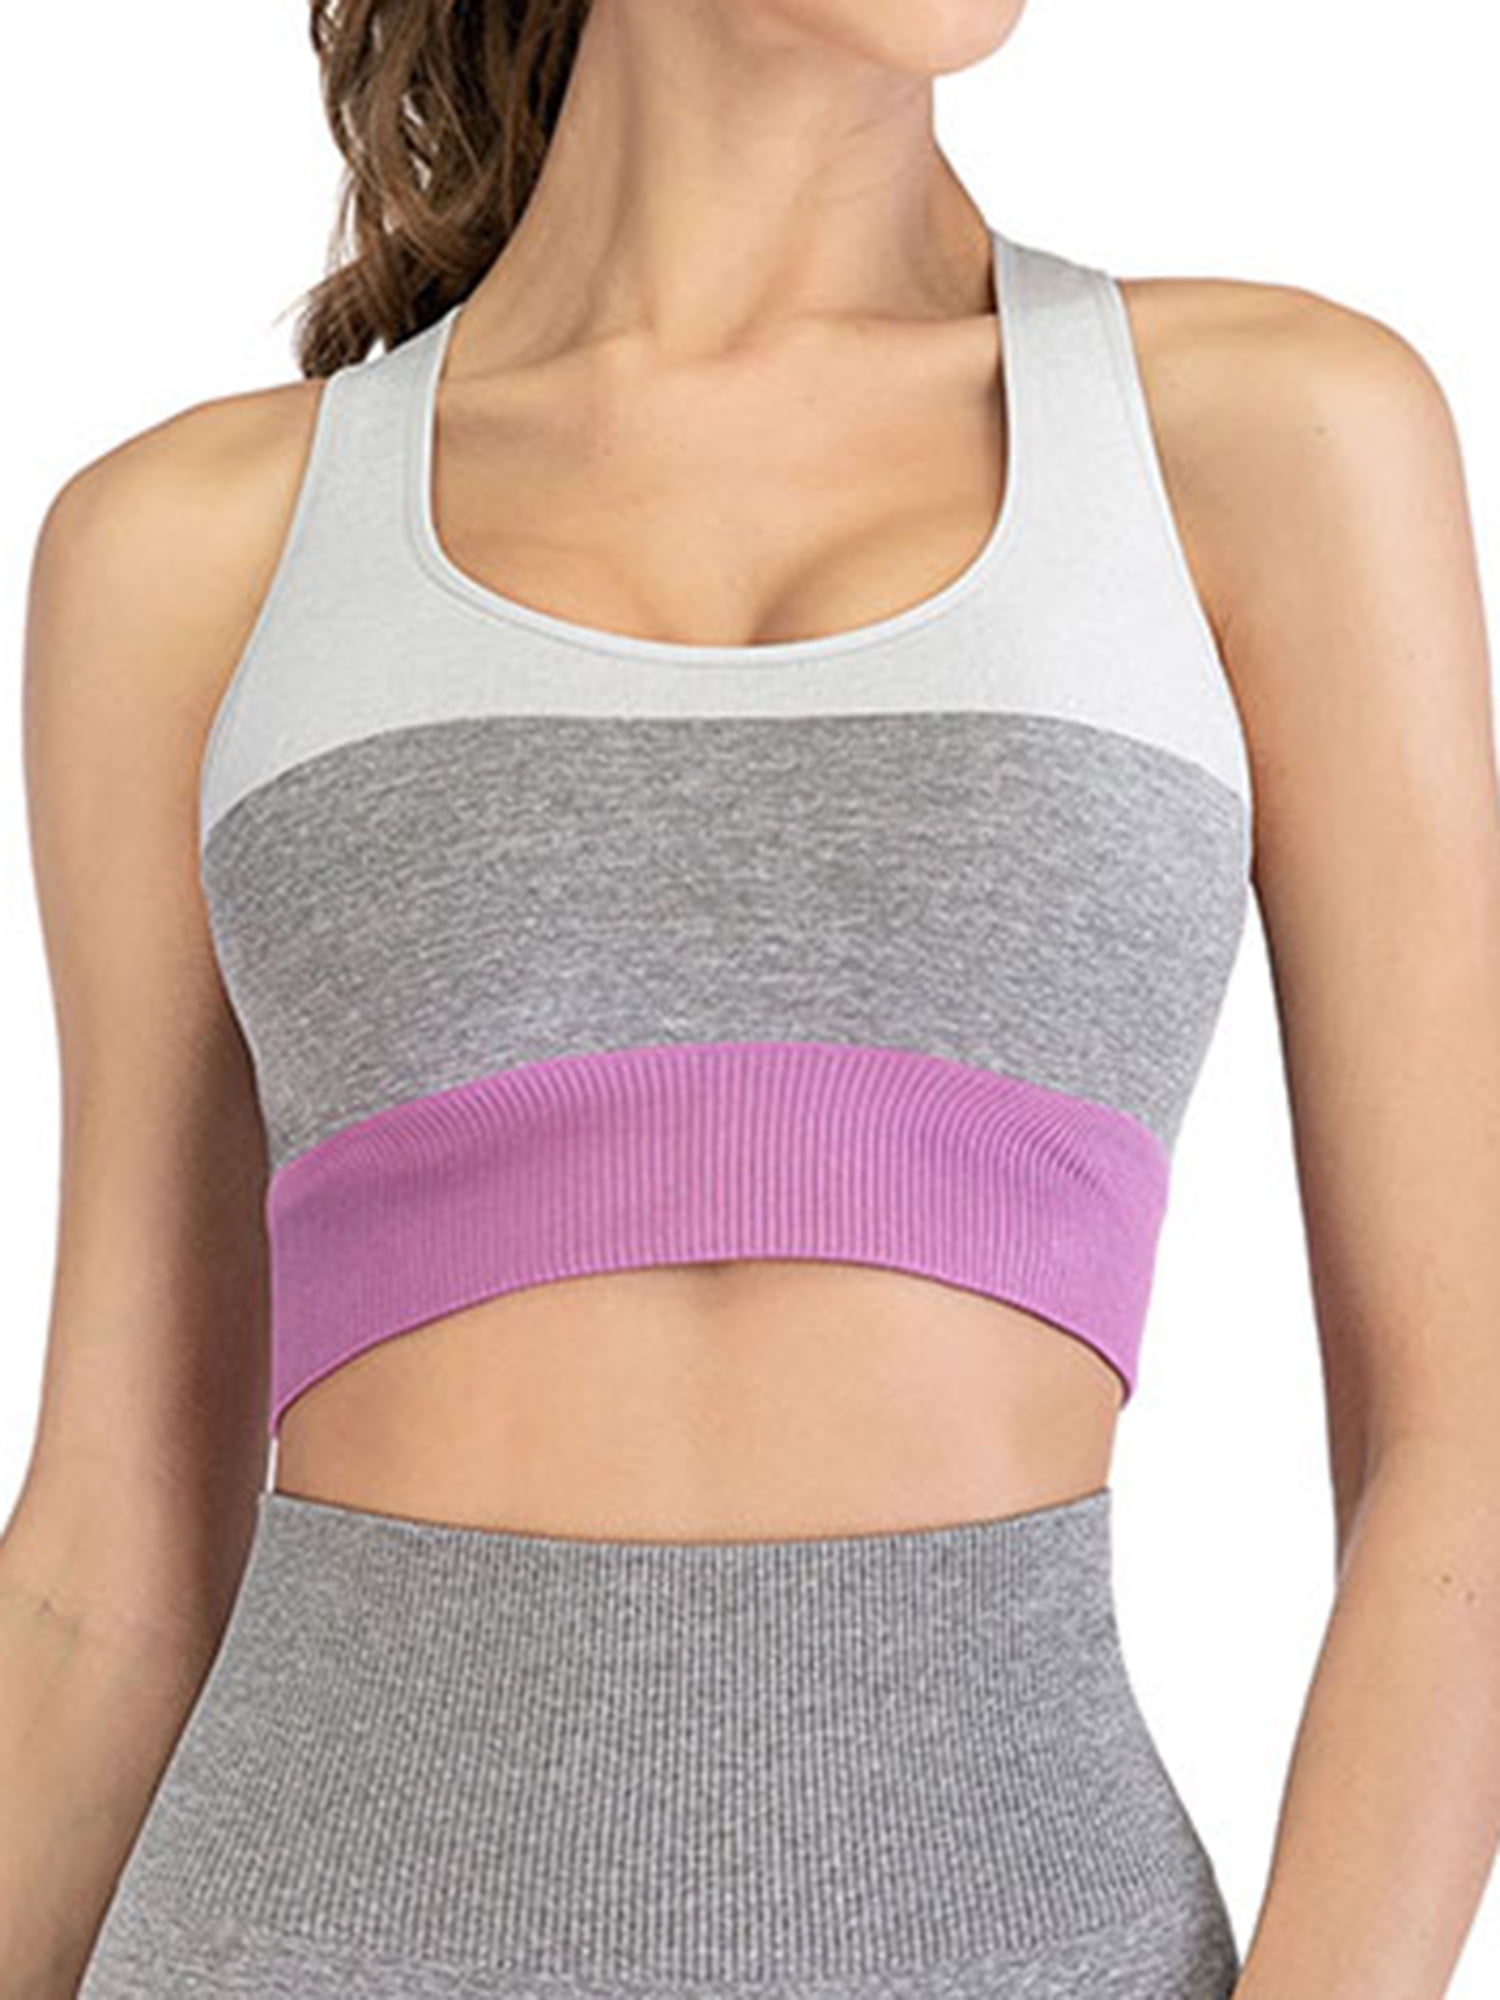 Workout Tops With Built In Bra Canada Covid